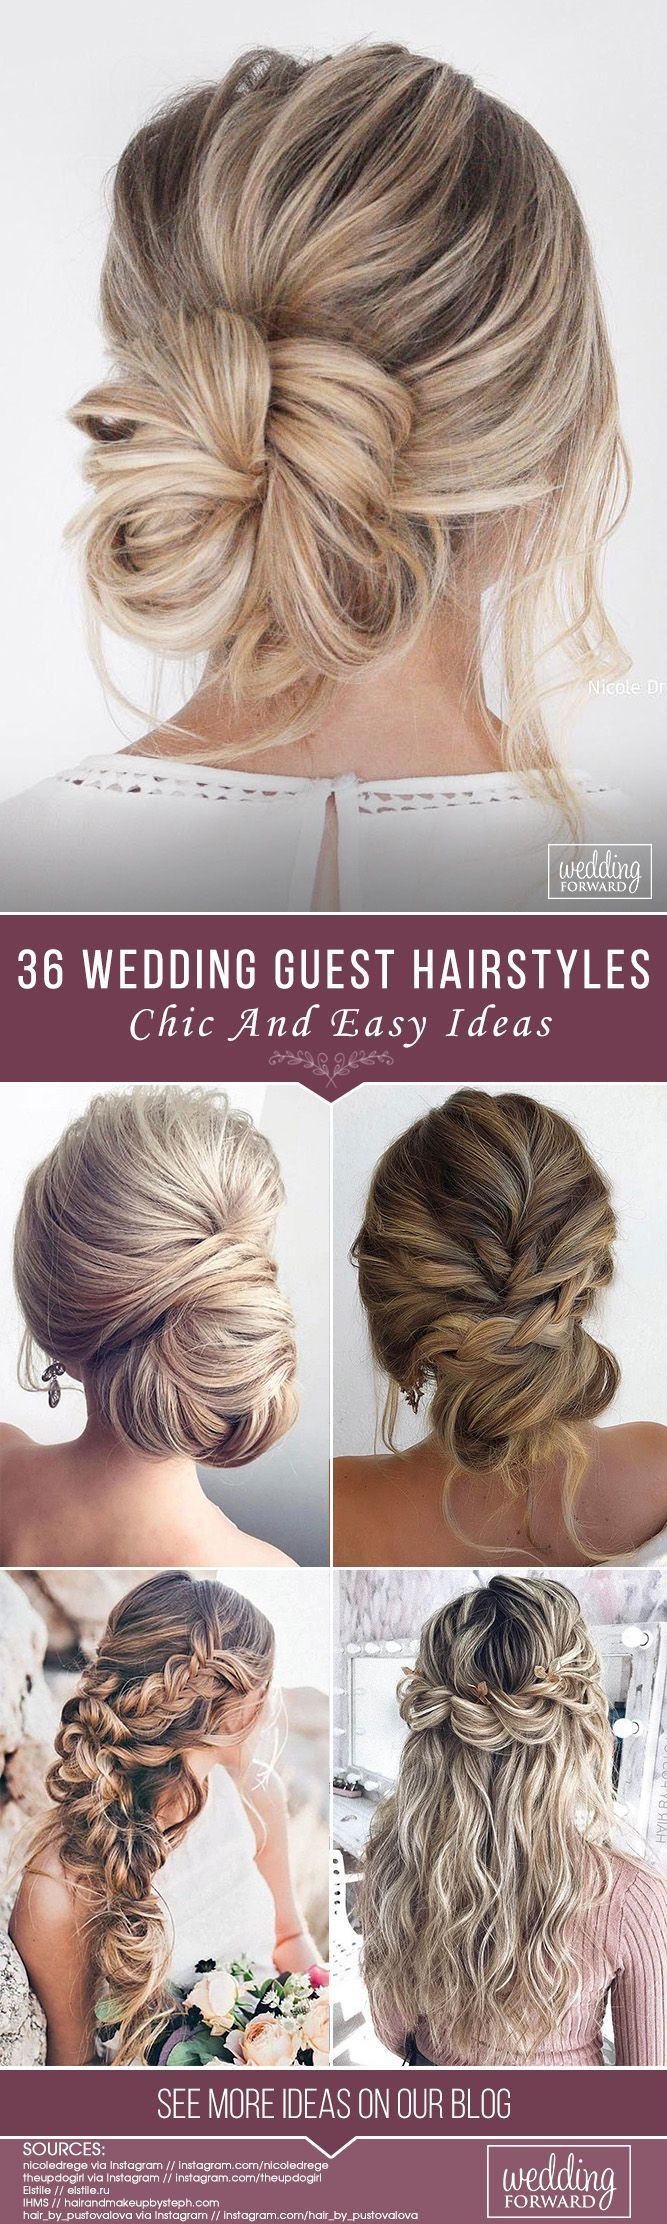 Wedding Guest Hairstyles DIY
 42 Wedding Guest Hairstyles The Most Beautiful Ideas